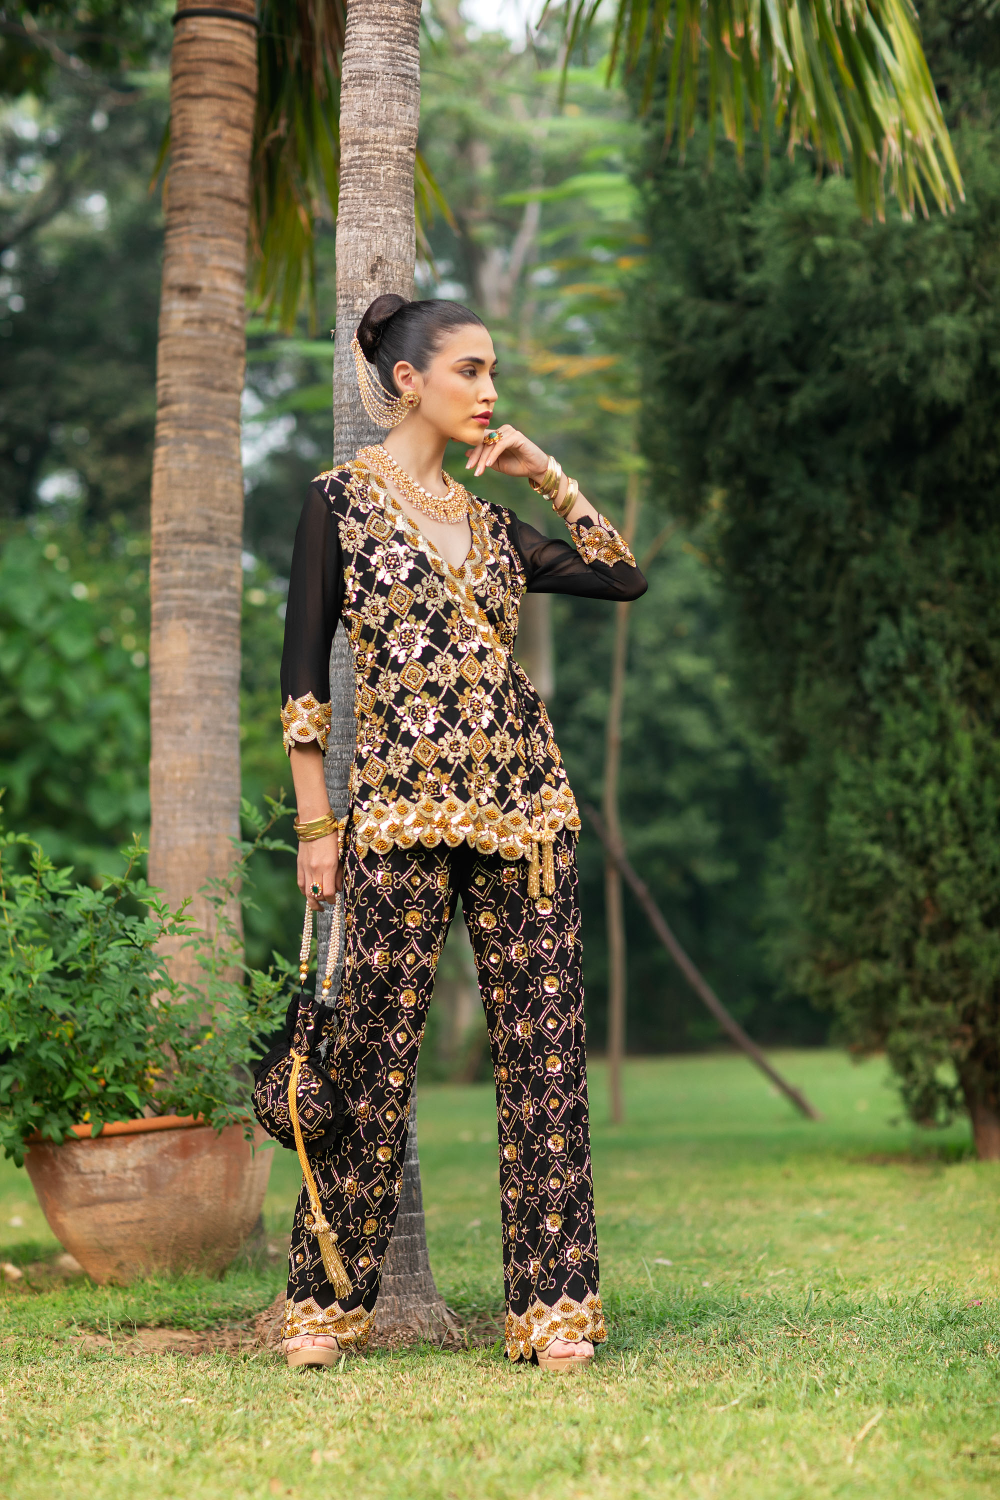 Black & Gold Cross Body with Embroidered Pants & Potli Bag